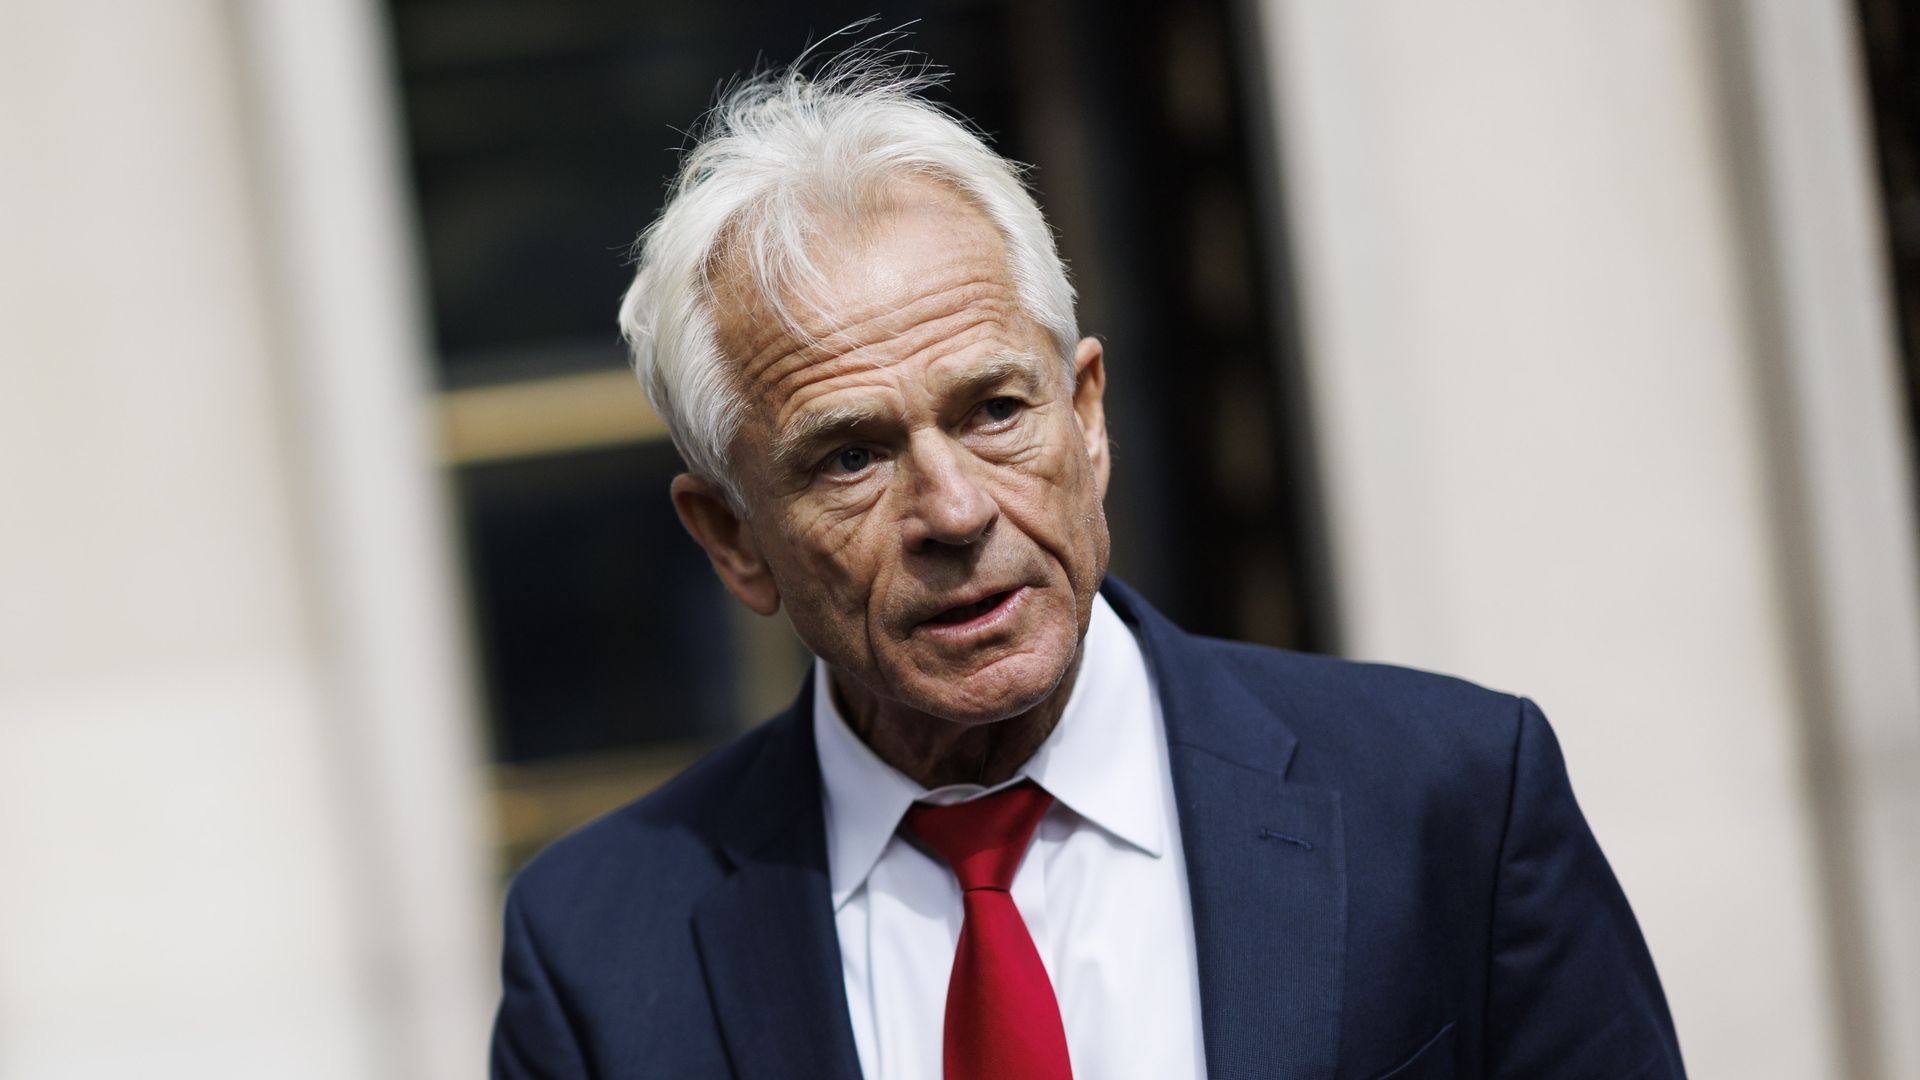 Peter Navarro, former White House trade adviser, speaks to members of the media after leaving federal court in Washington, D.C., US, on Friday, June 3.